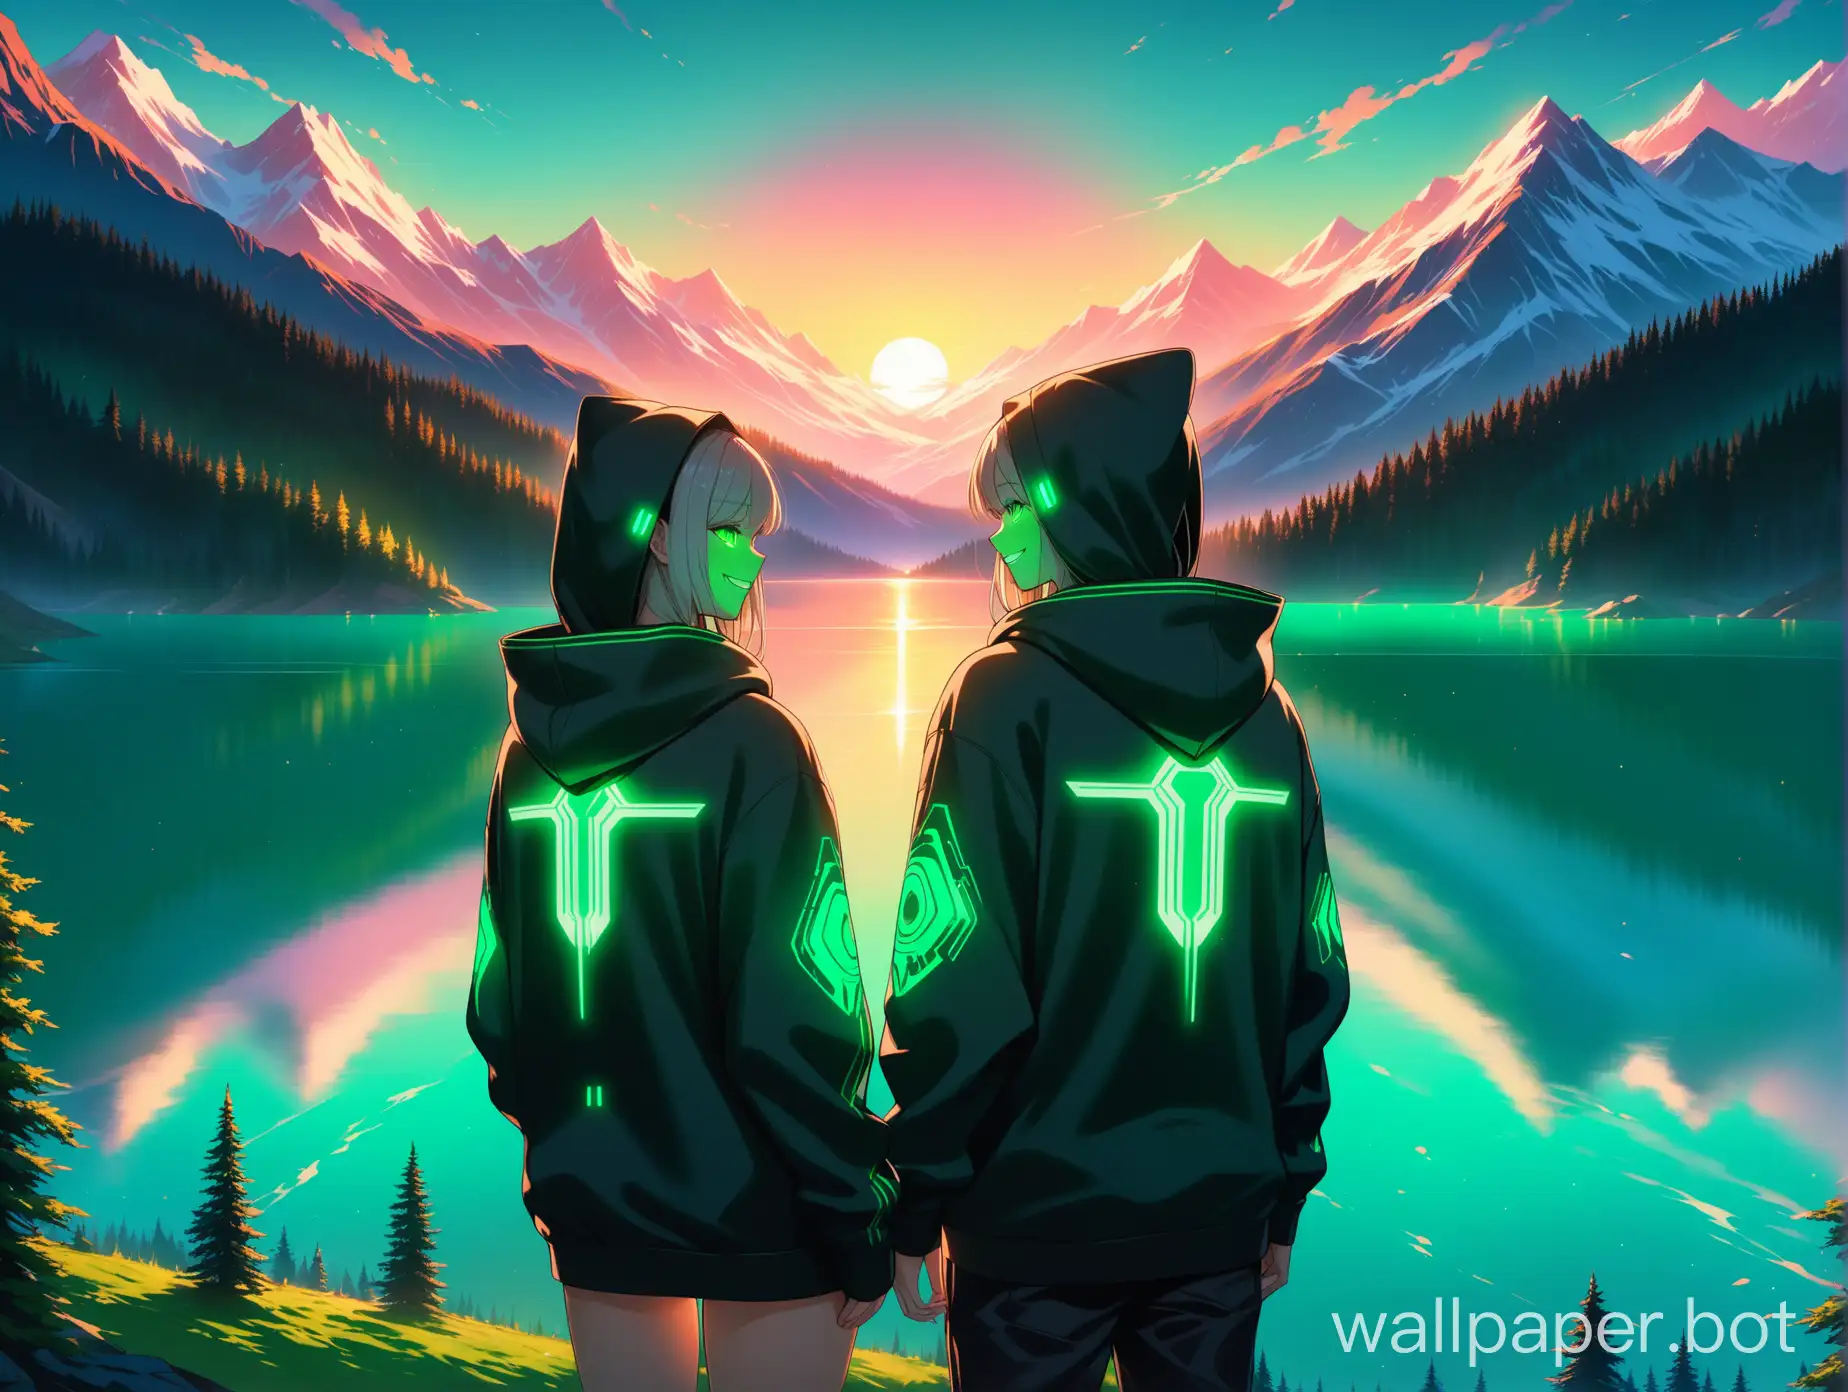 high-res, masterpiece, 4k, 8k, lake, mountain, forest, sunset, green cyber, futuristic, boy and girl in black hoodies, glowing green smile on the back of hoodie